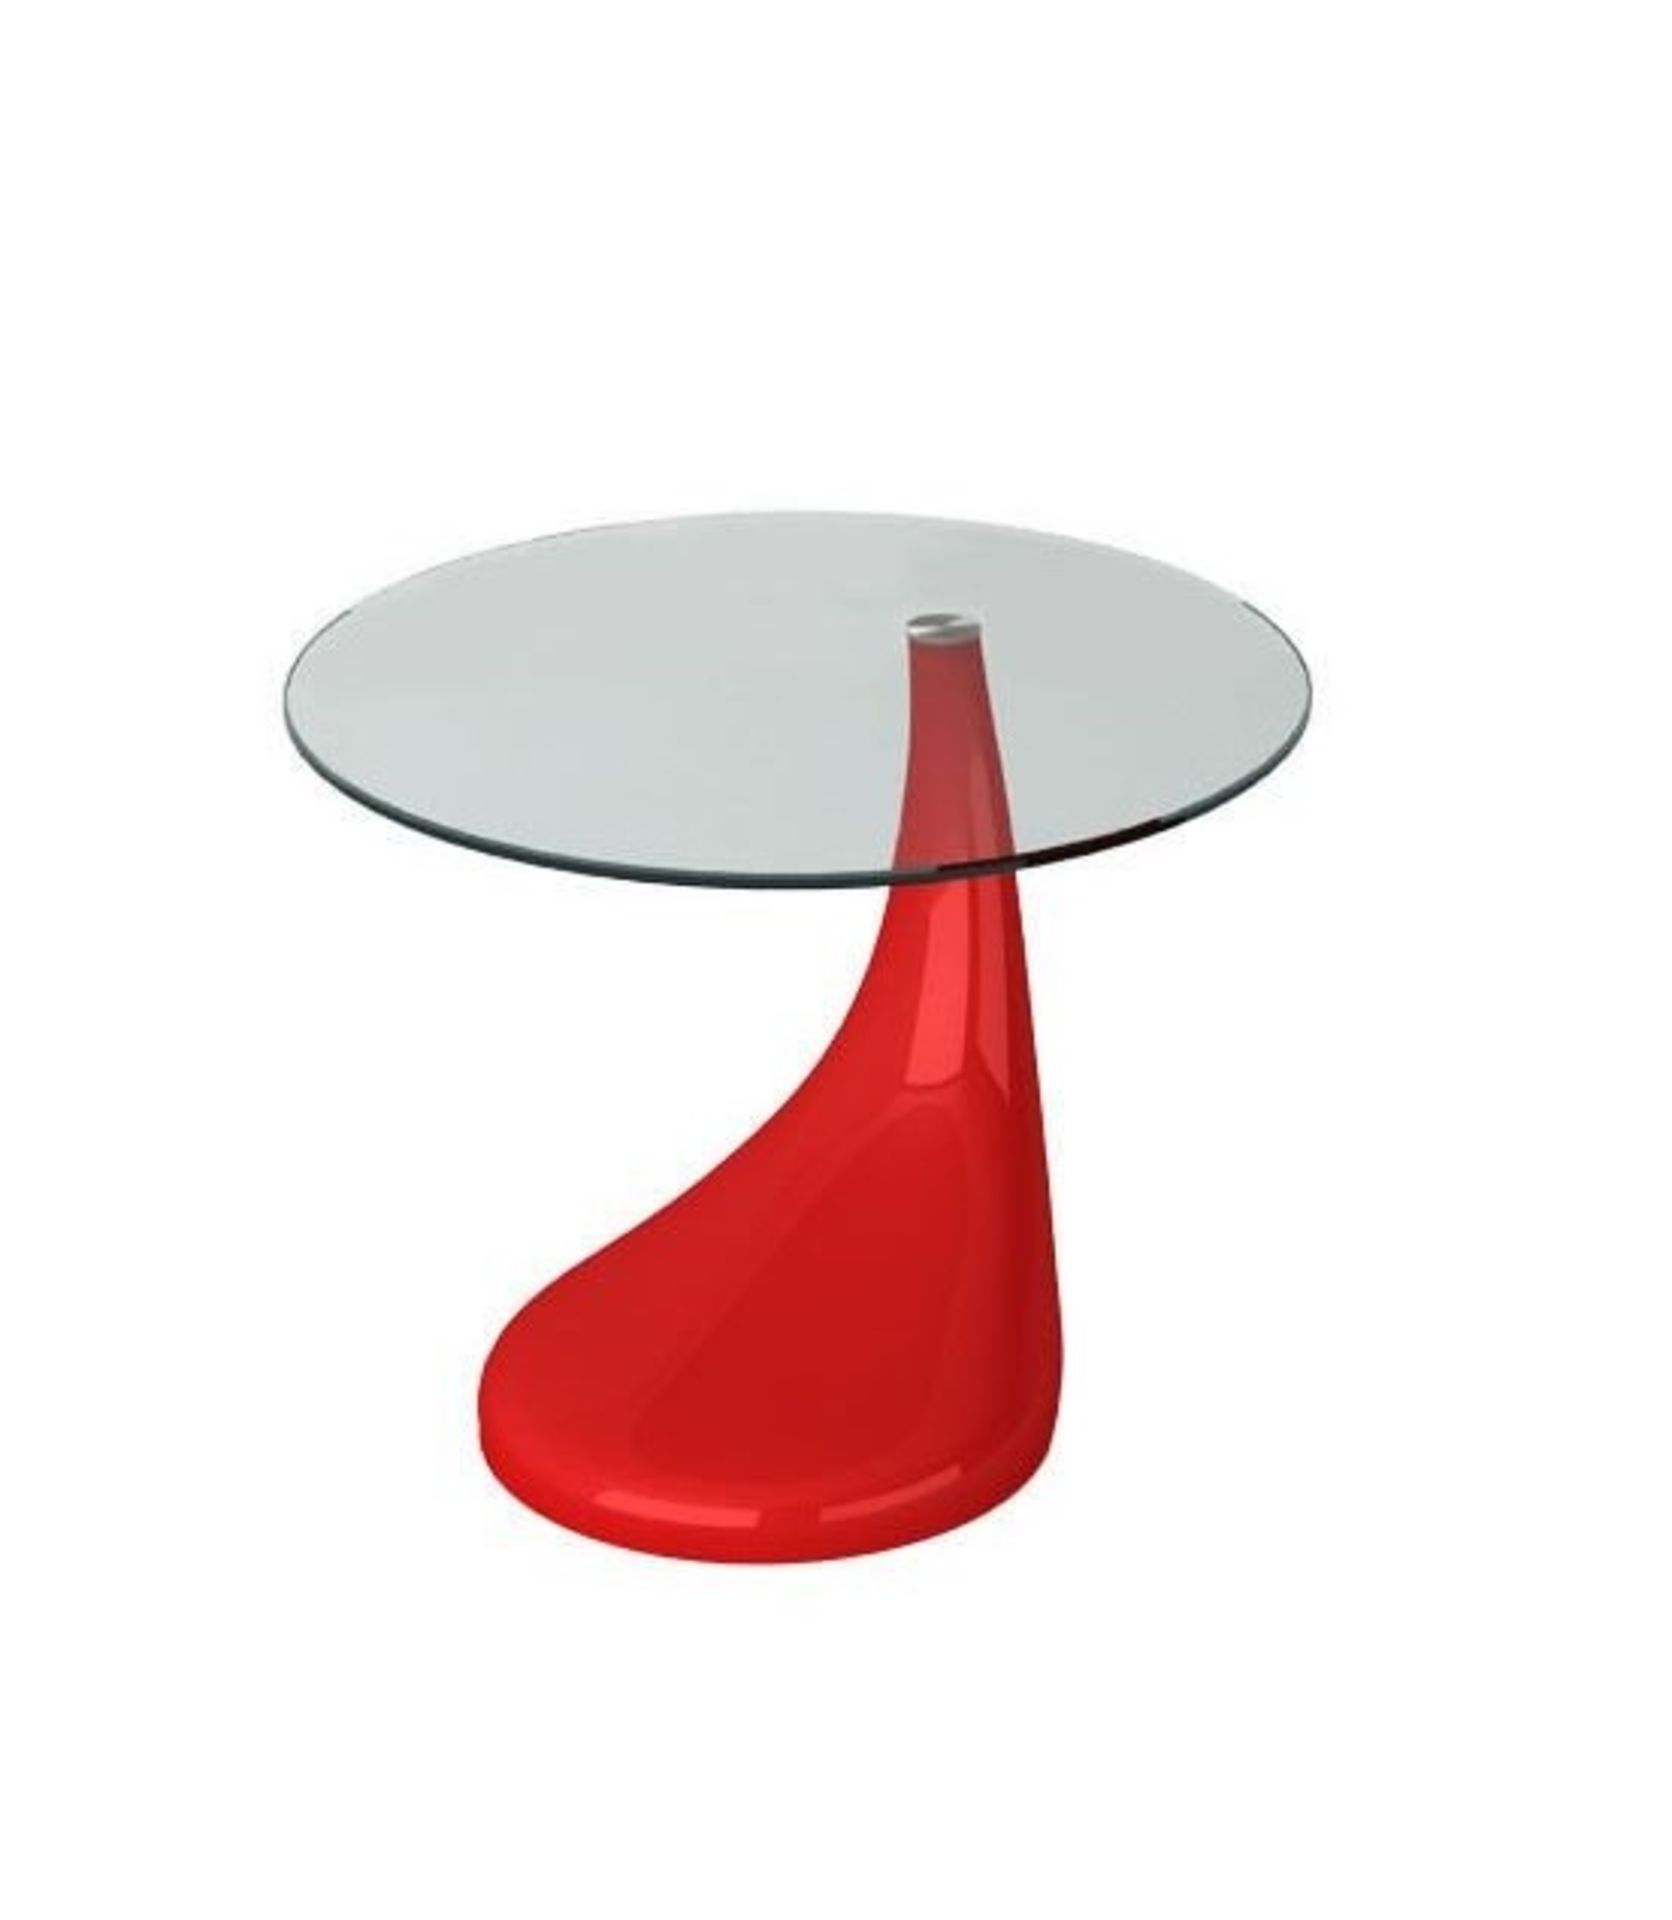 1 x Red Gloss Base Glass Coffee Table - Product Code CTB415RED (Brand New & Boxed)